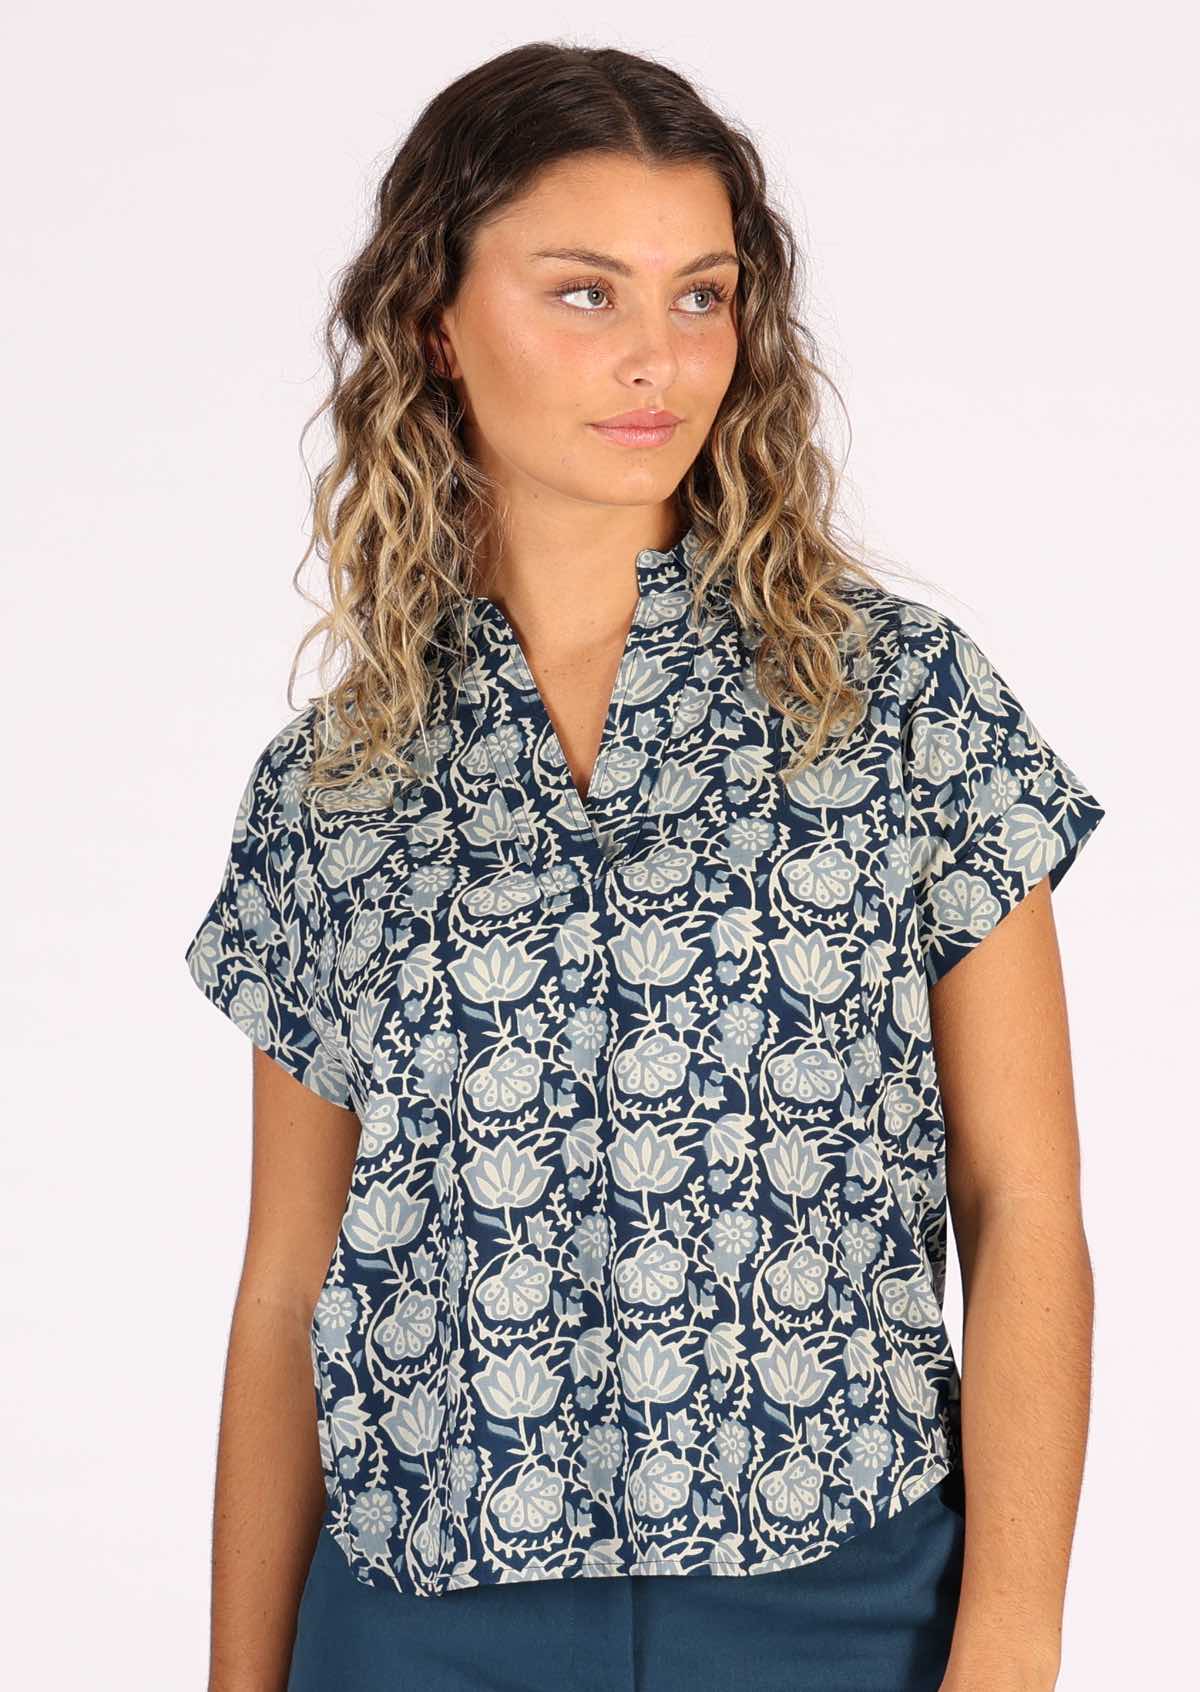 Blue floral print cotton relaxed fit top with collar